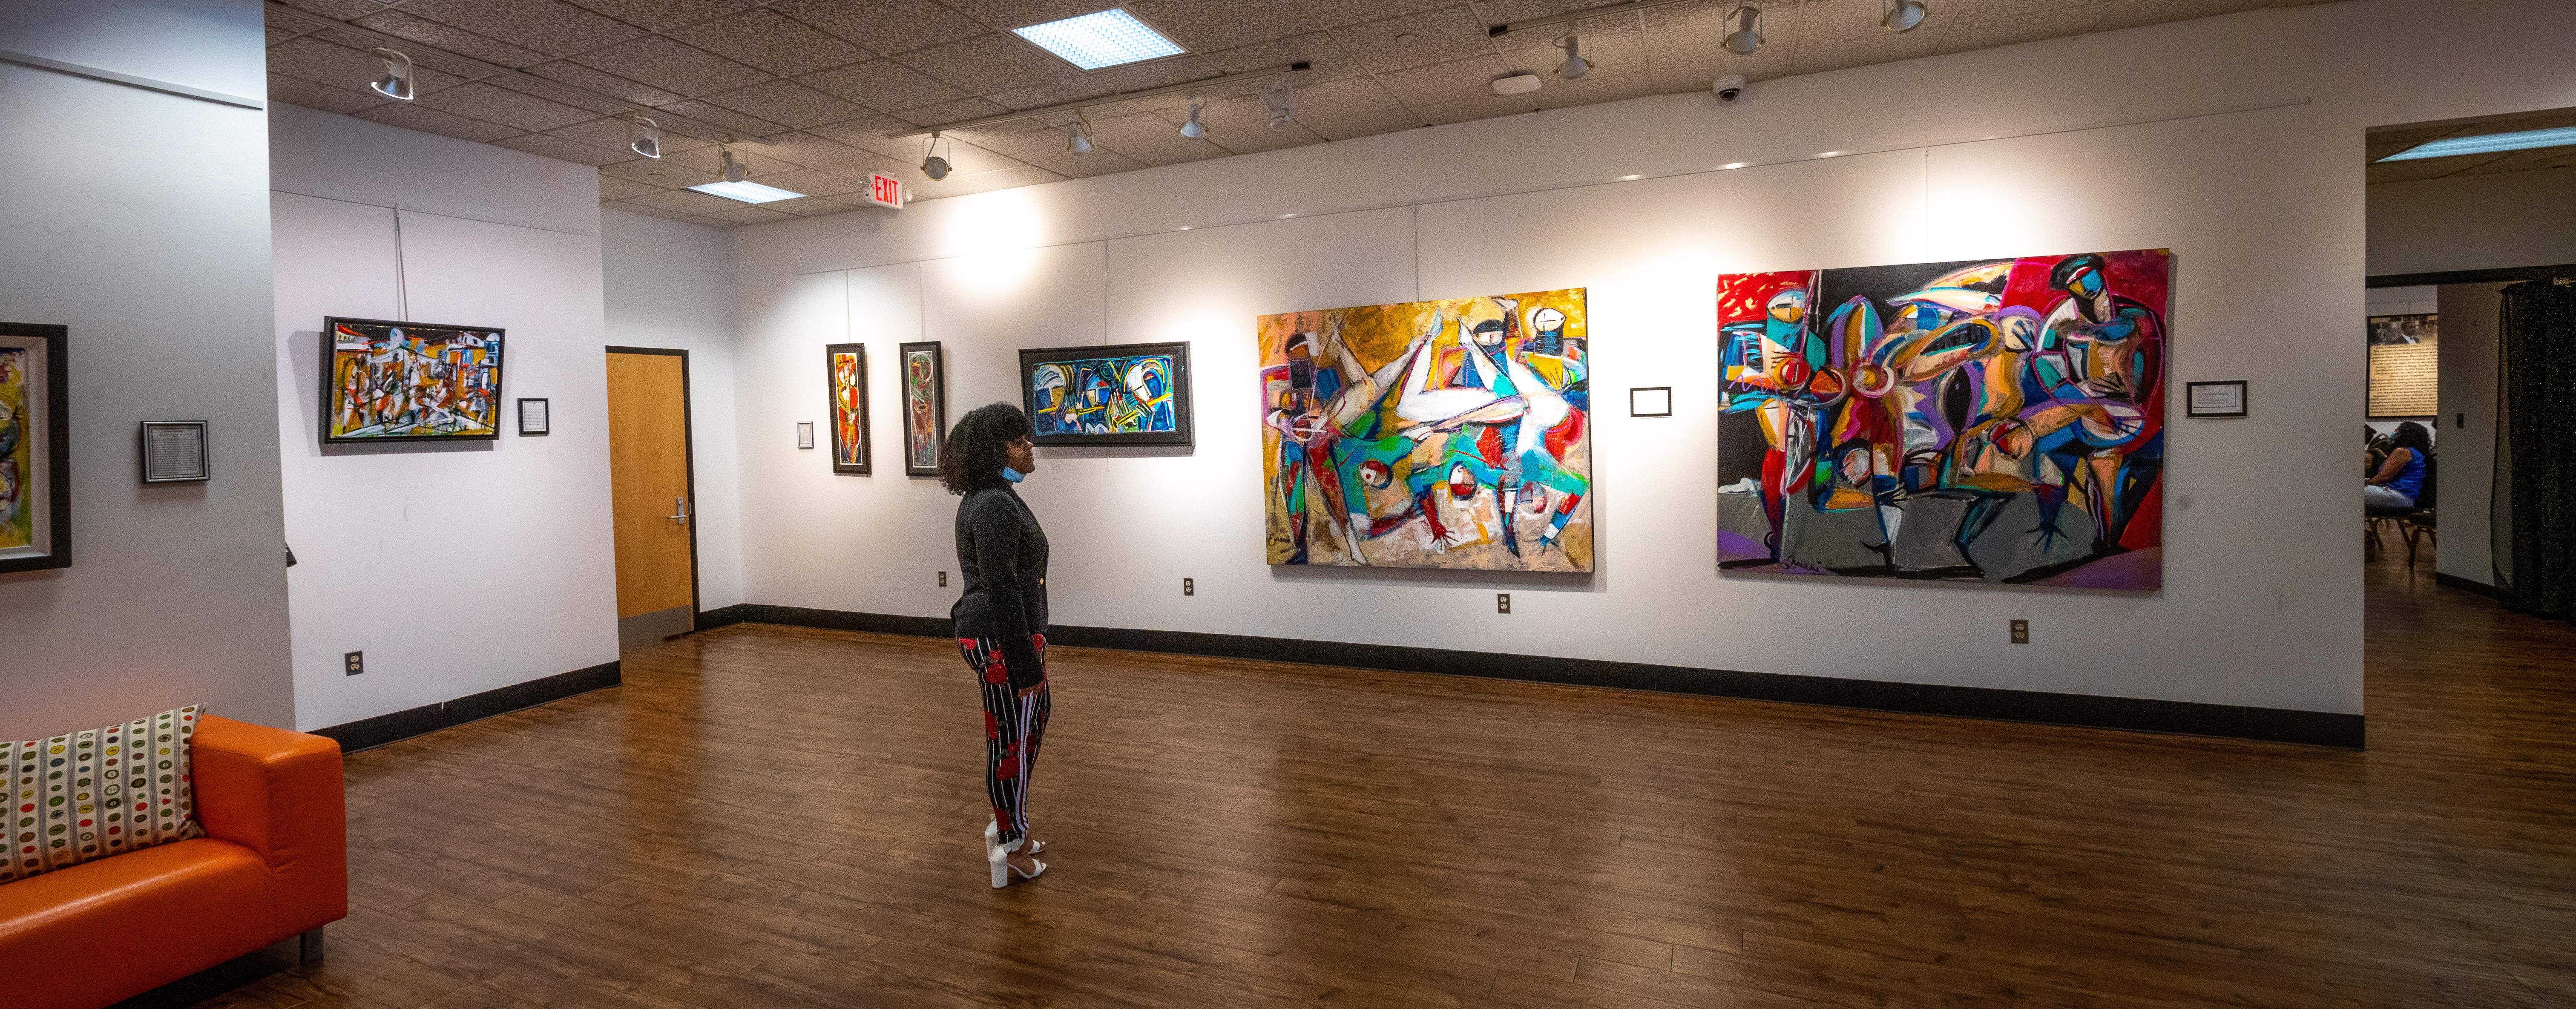 A person looks at artwork inside The Pearse African American Museum on Long Island